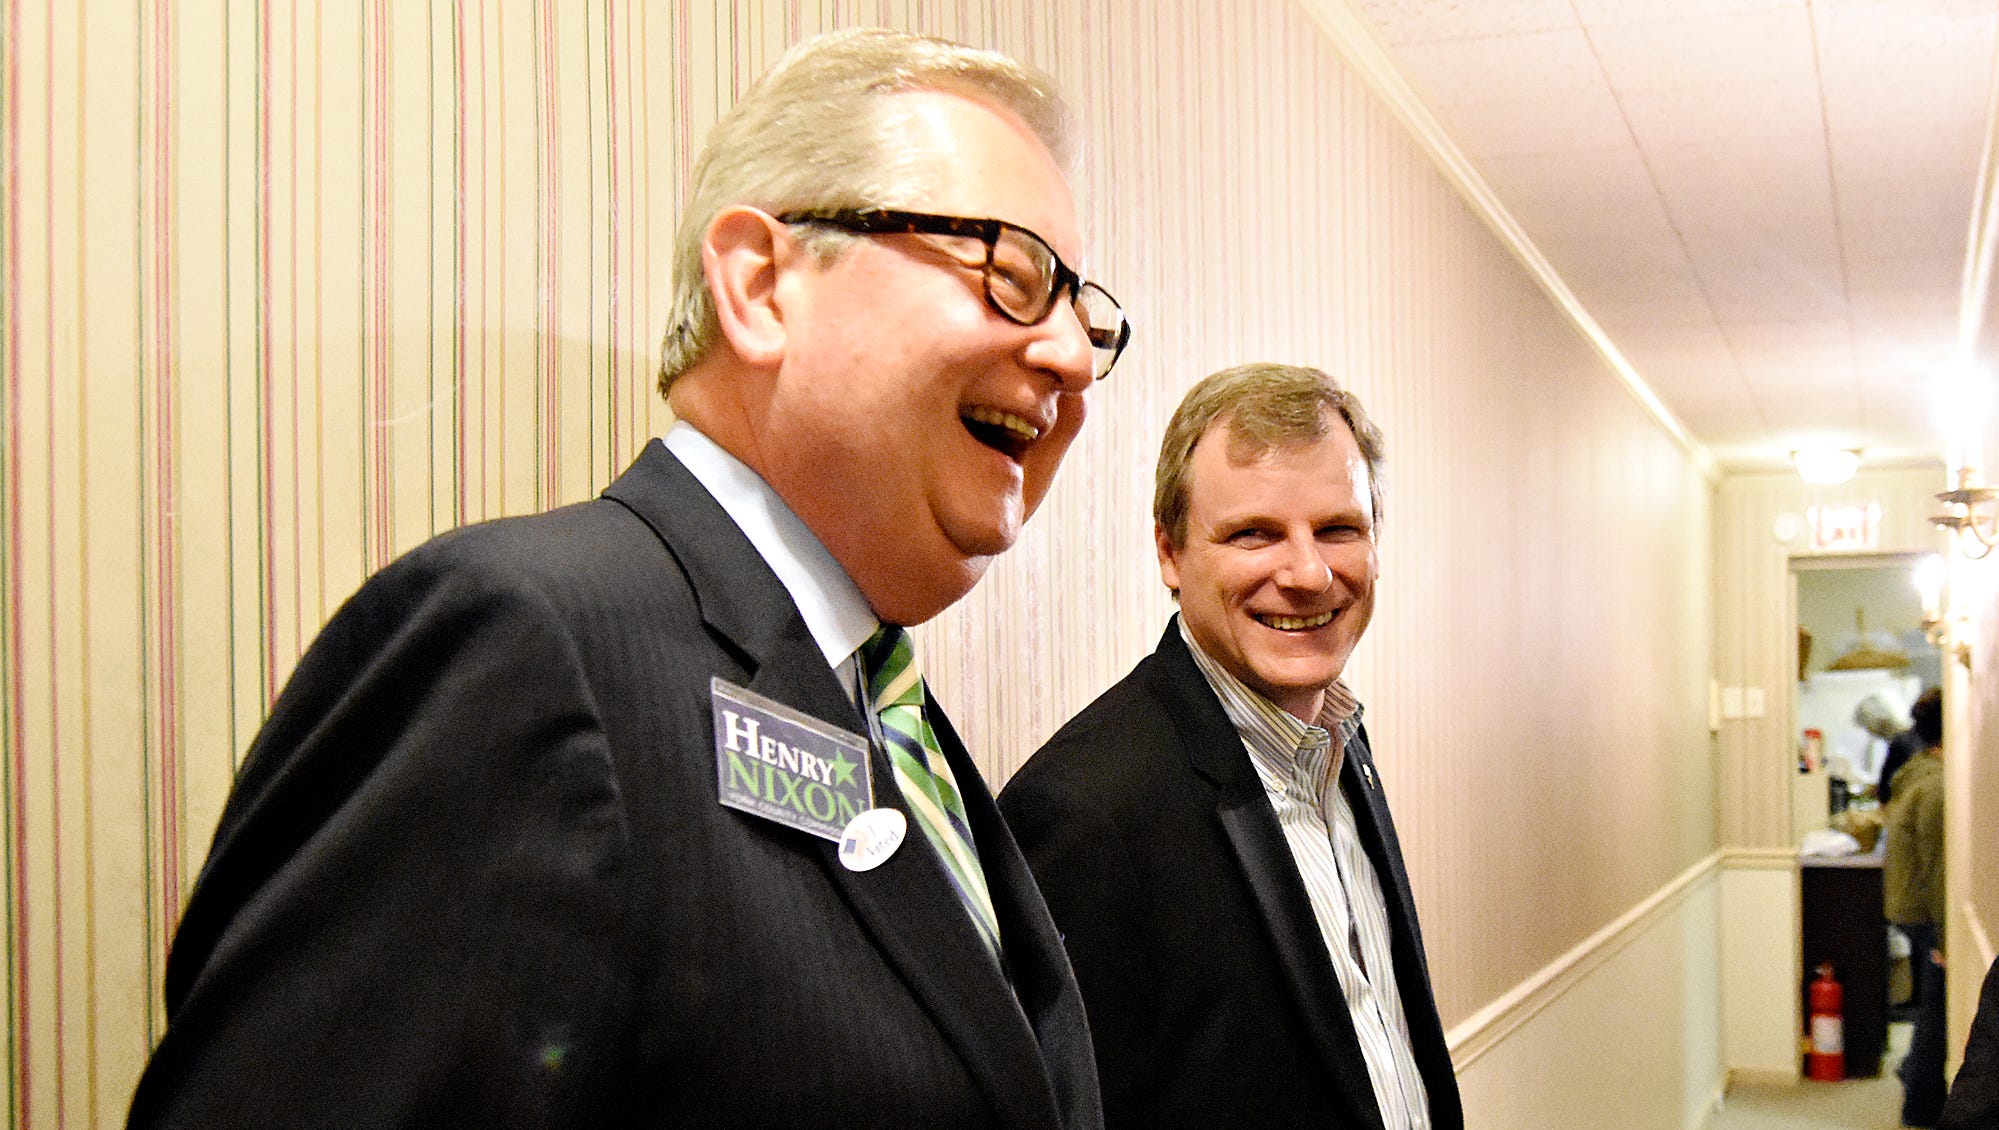 City Councilmen Michael Helfrich, right, and Henry Nixon, left, share a laugh during election night at the Democratic Party Headquarters on South Duke Street in York, Pa. on Tuesday, Nov. 3, 2015. Dawn J. Sagert - dsagert@yorkdispatch.com